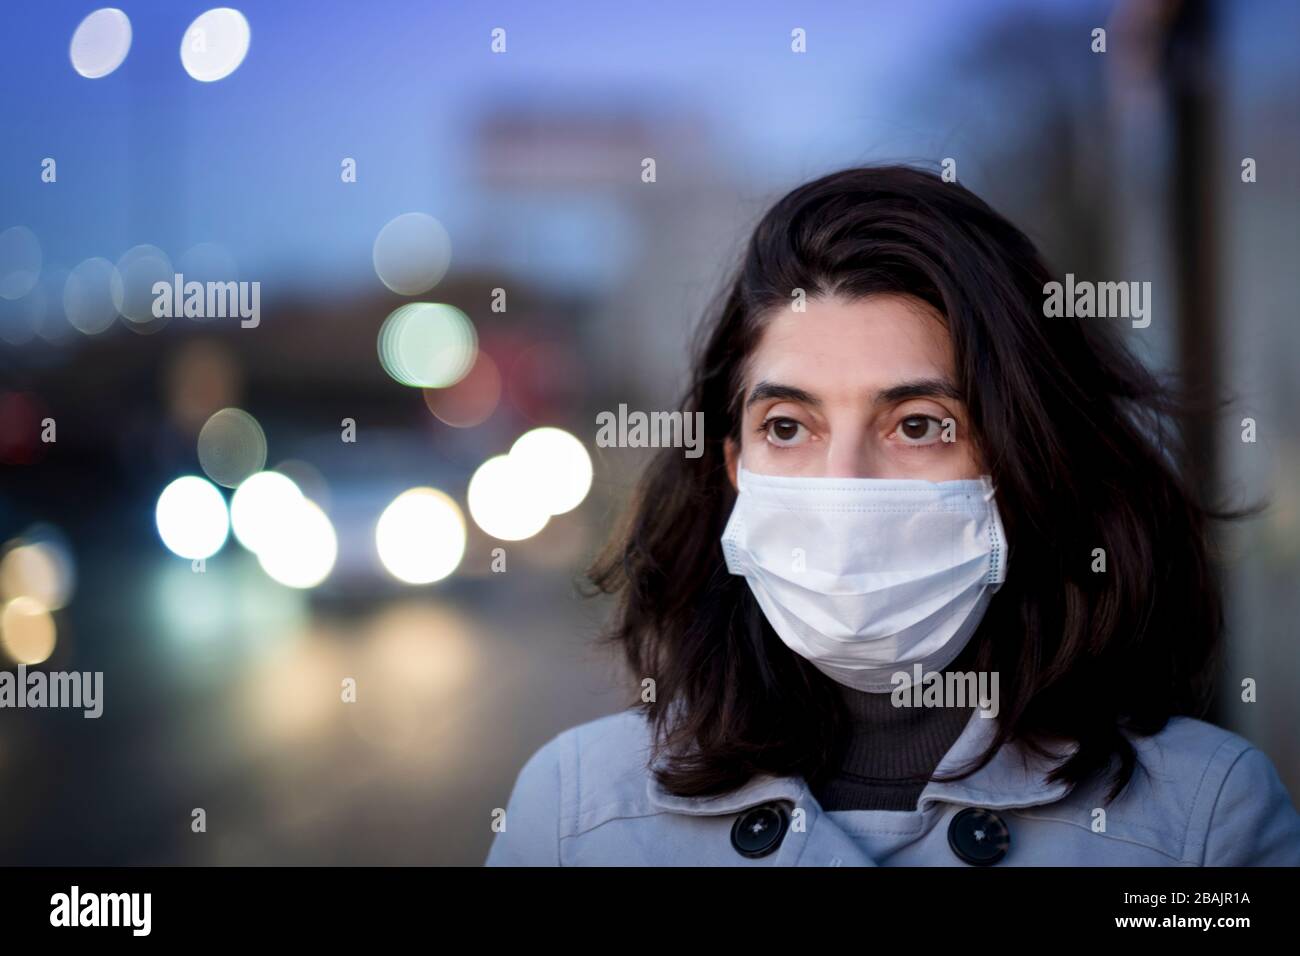 A woman wearing a face mask and standing outside during the Coronavirus outbreak Stock Photo